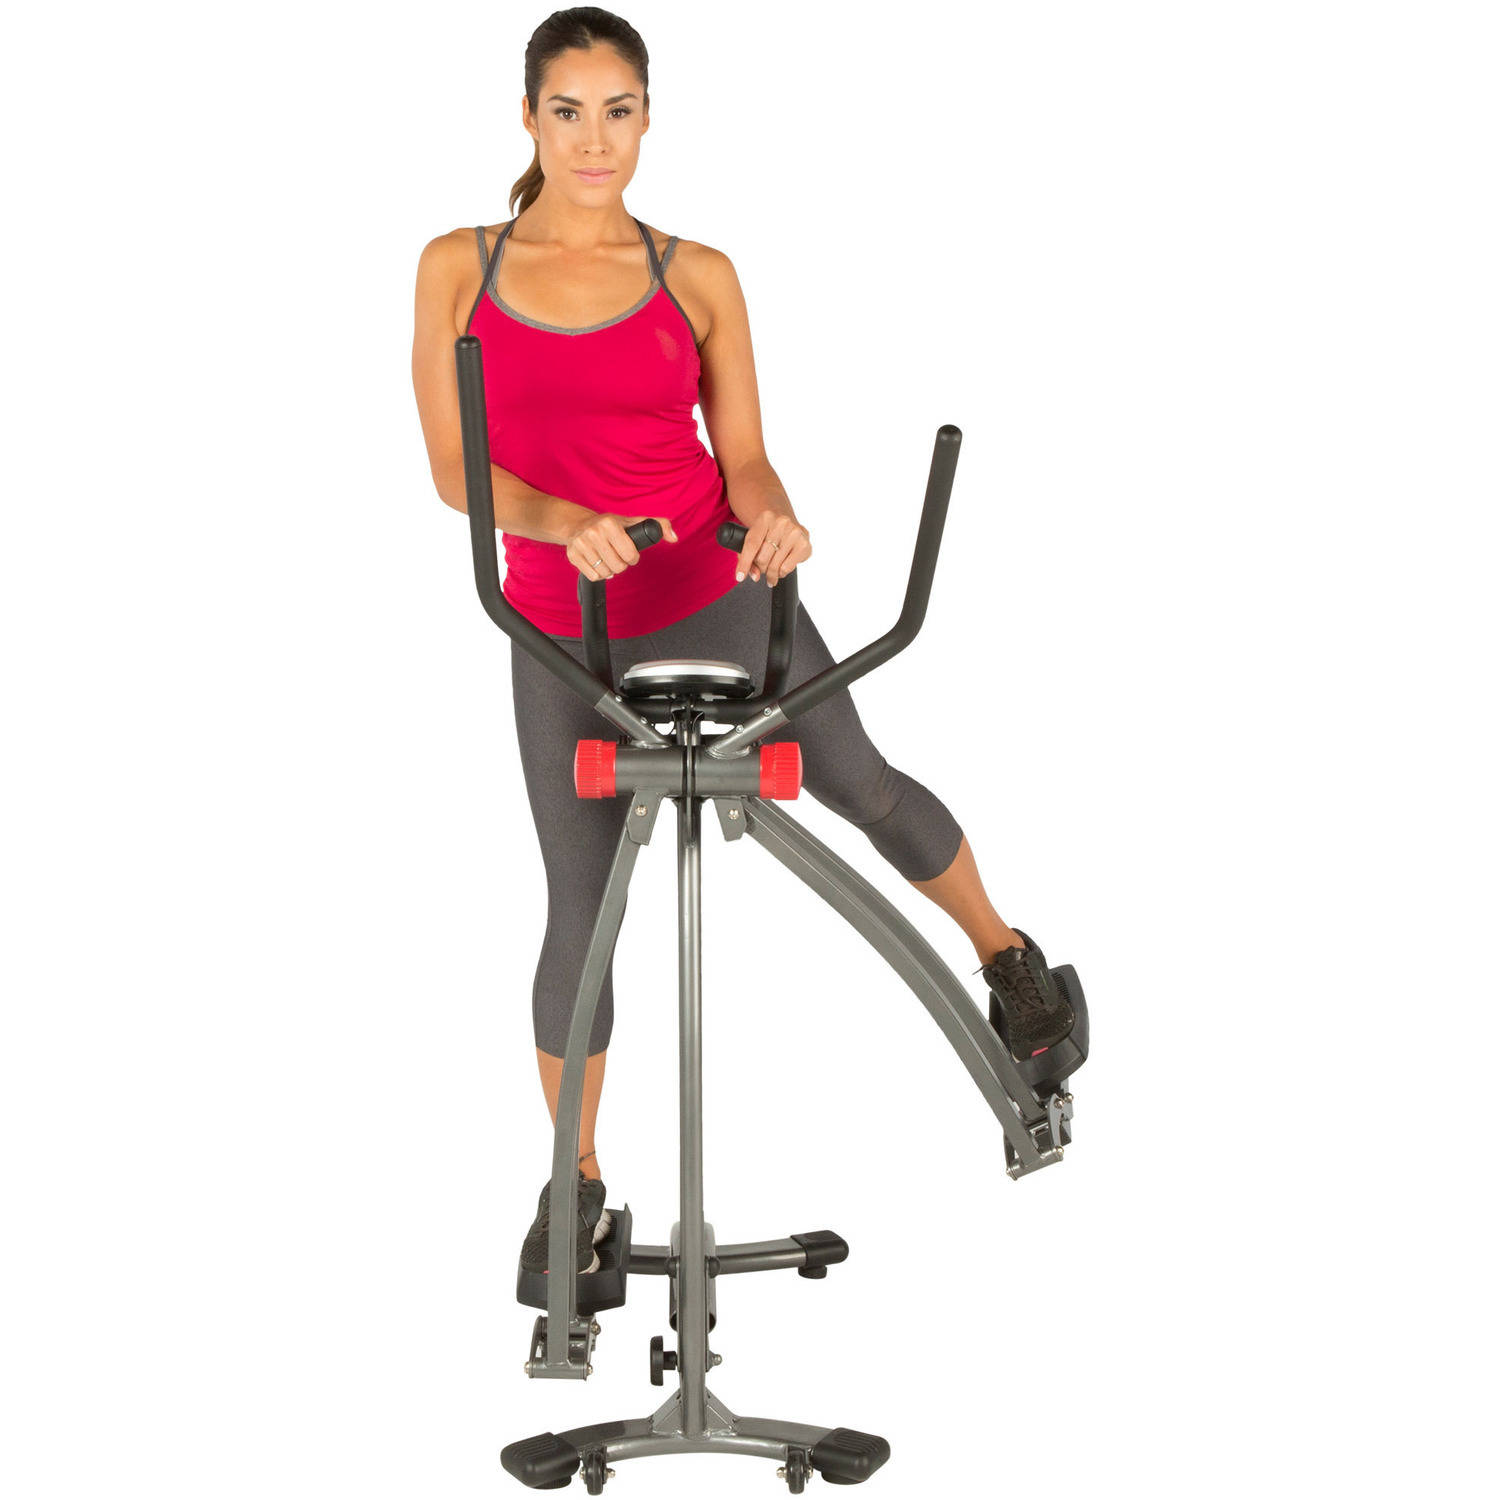 Fitness Reality Multi-Direction Elliptical Cloud Walker X1 with Pulse Sensors - image 26 of 31